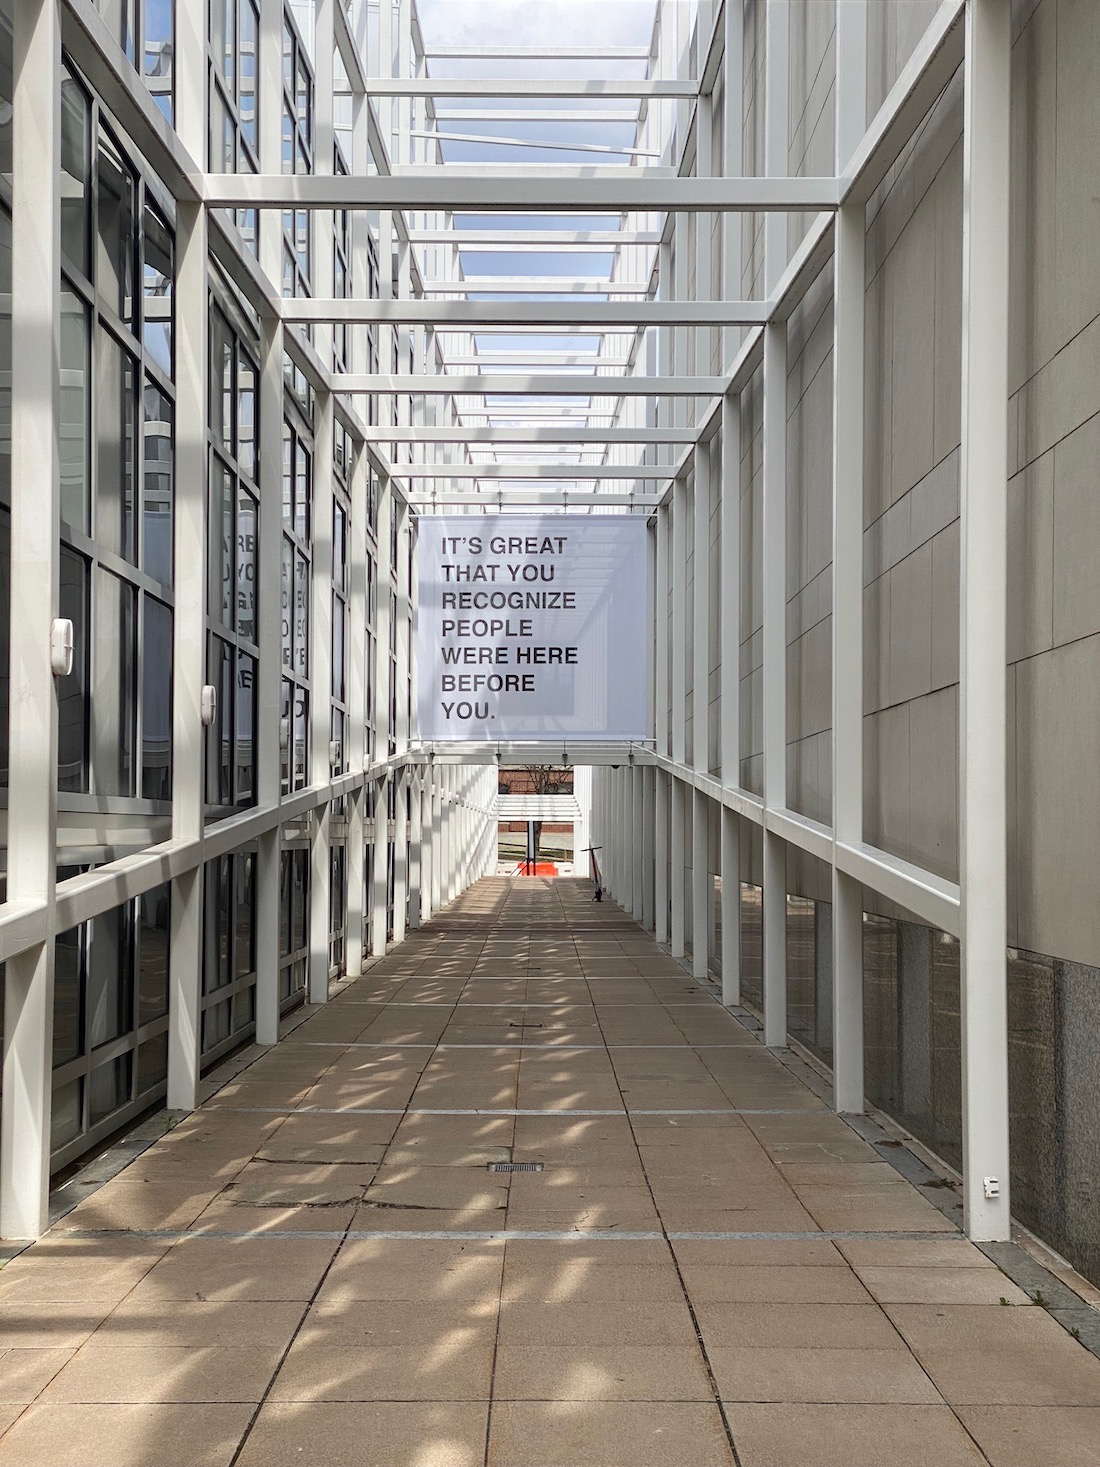 A walkway contained by an open grid of white metal bars, on which a text work is installed overhead. It reads, "IT'S GREAT THAT YOU RECOGNIZE PEOPLE WERE HERE BEFORE YOU"